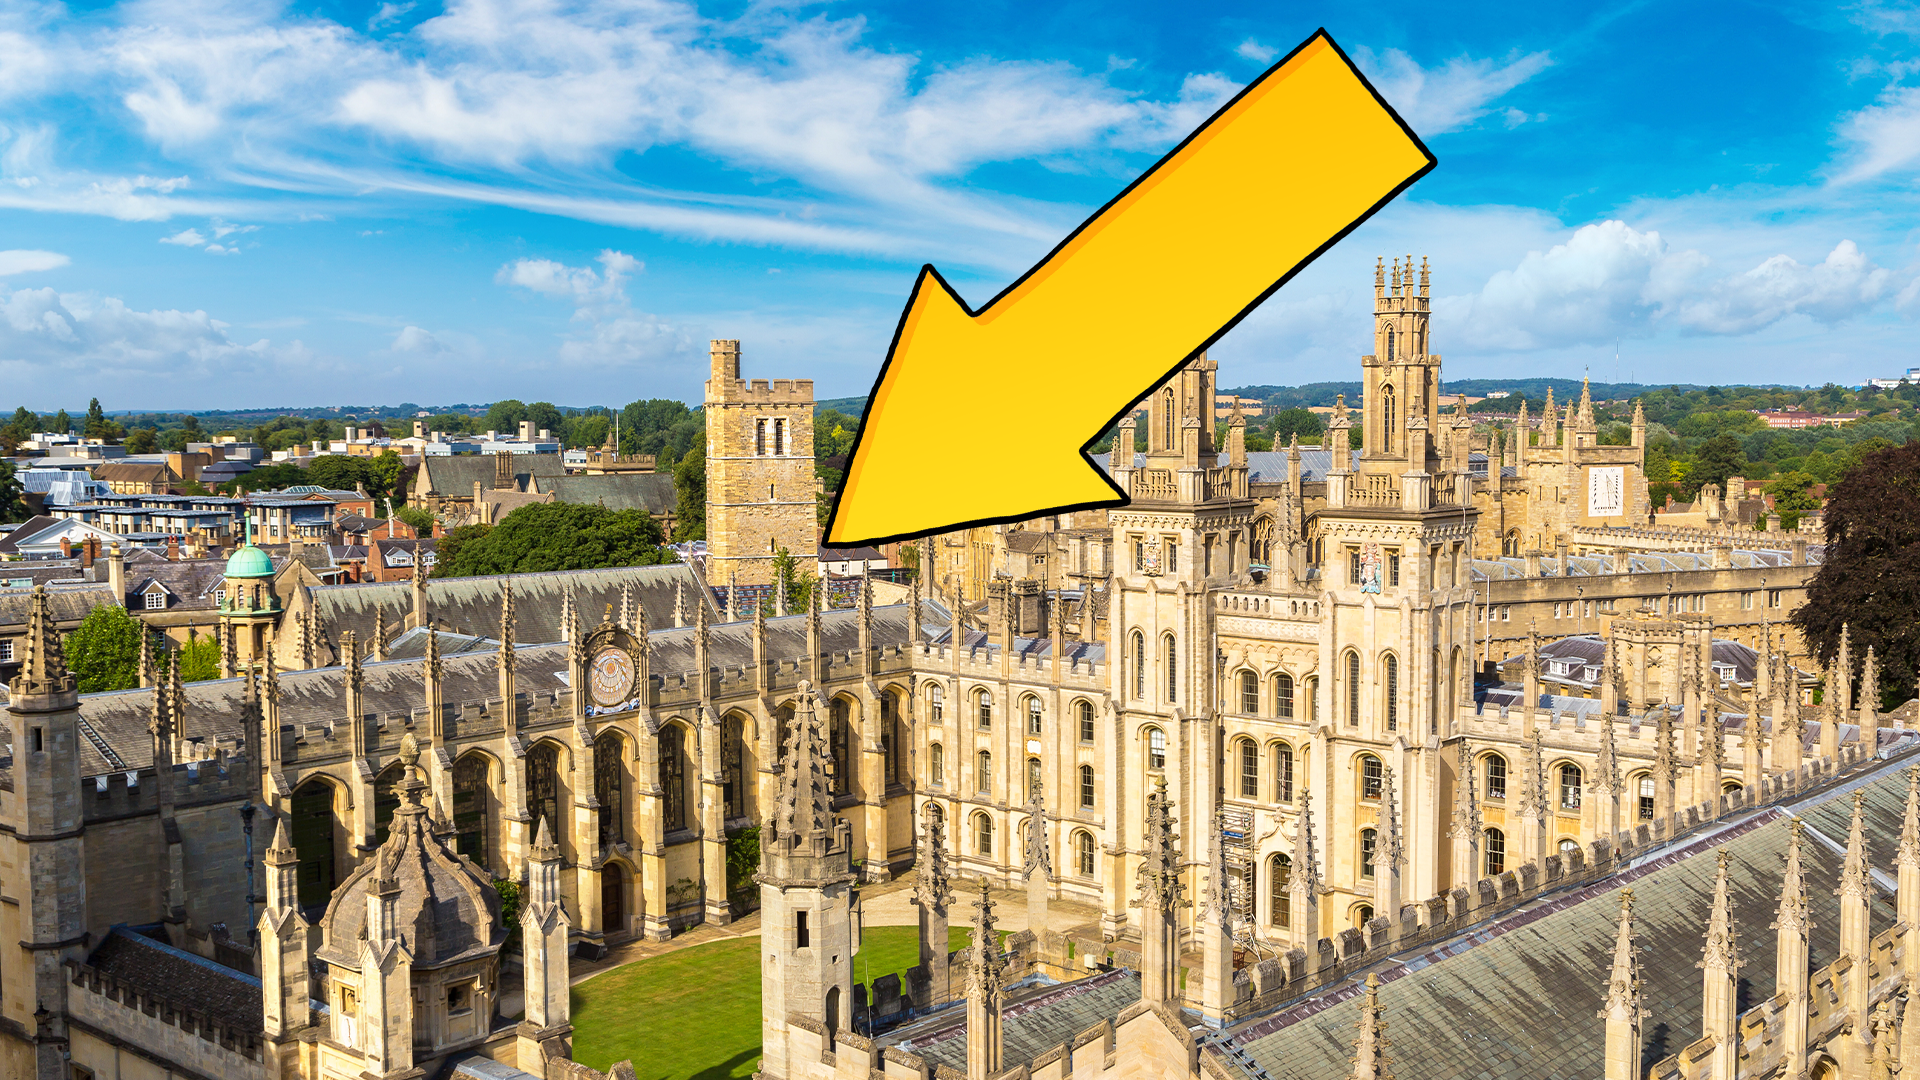 View of Oxford and an arrow